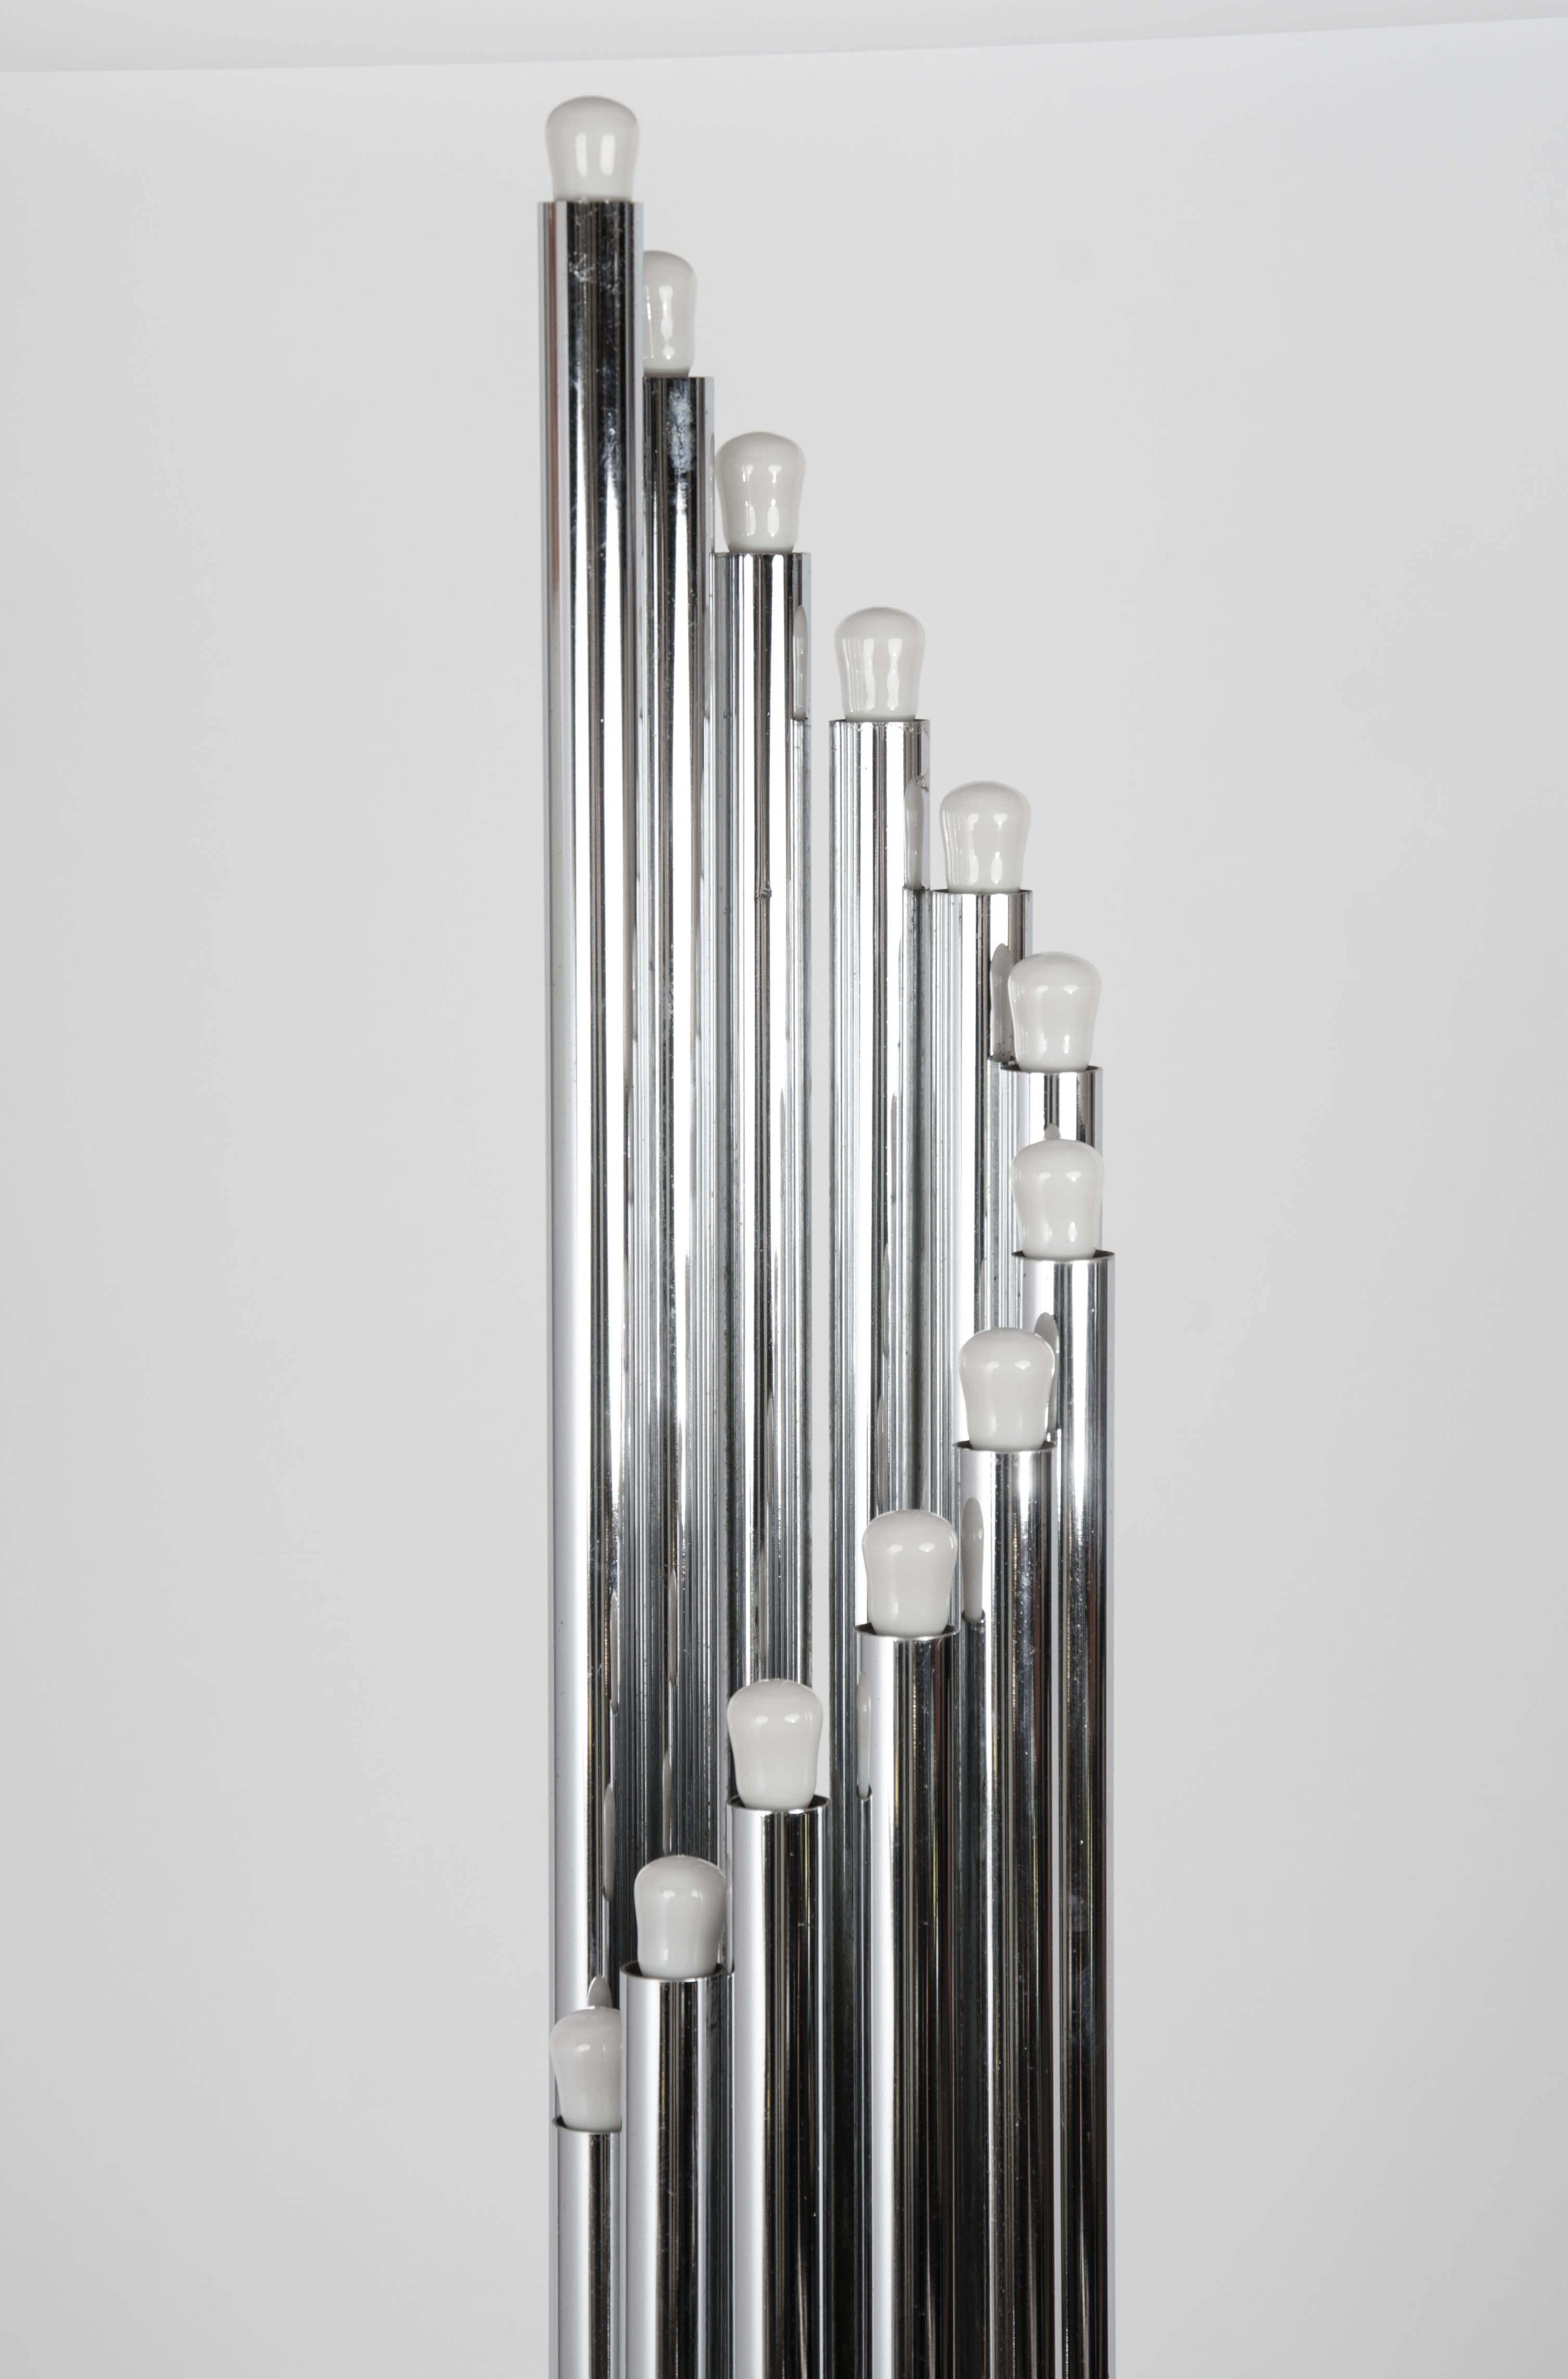 Minimalist chrome tubular floor lamps with an array of ascending or descending tubular lights spiraling from a round plinth like organ pipes. It is compact and sculptural design from the 1960's.